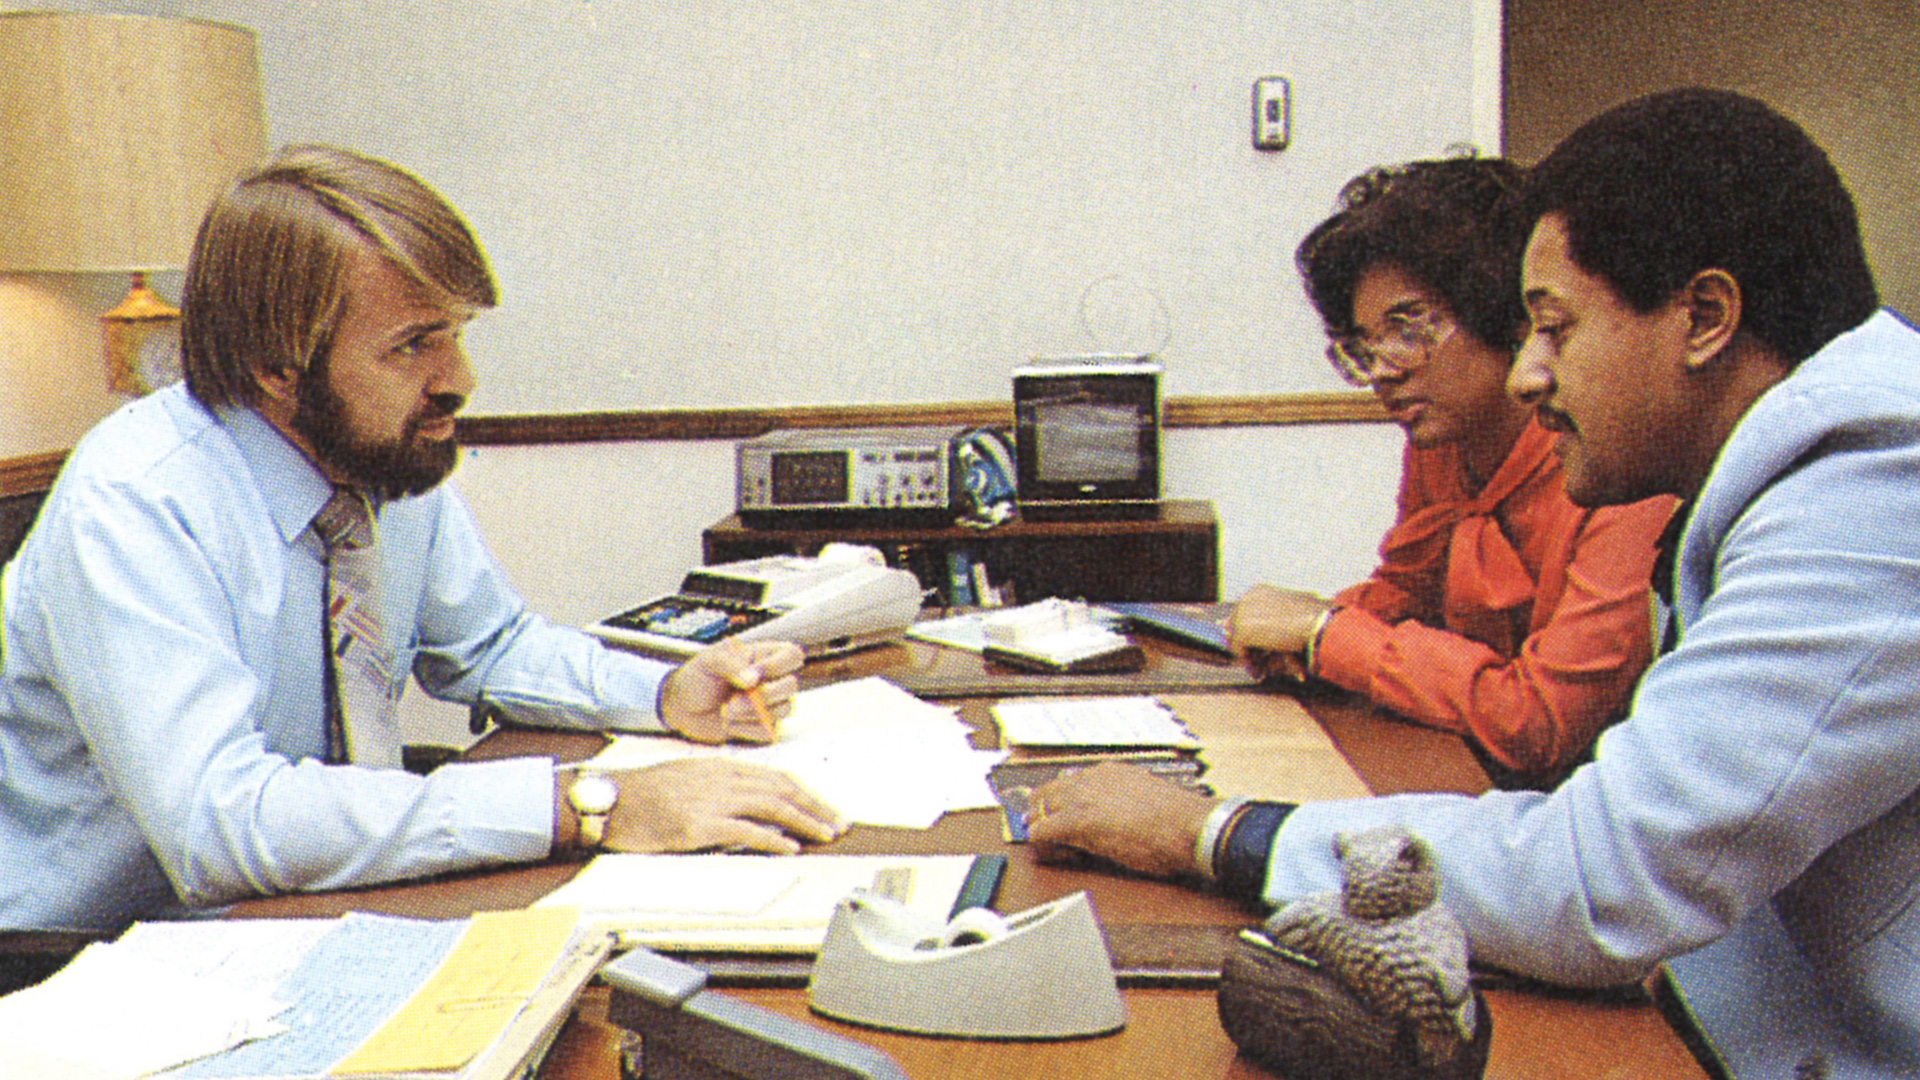 STRS Ohio benefits counseling session in the 1970s